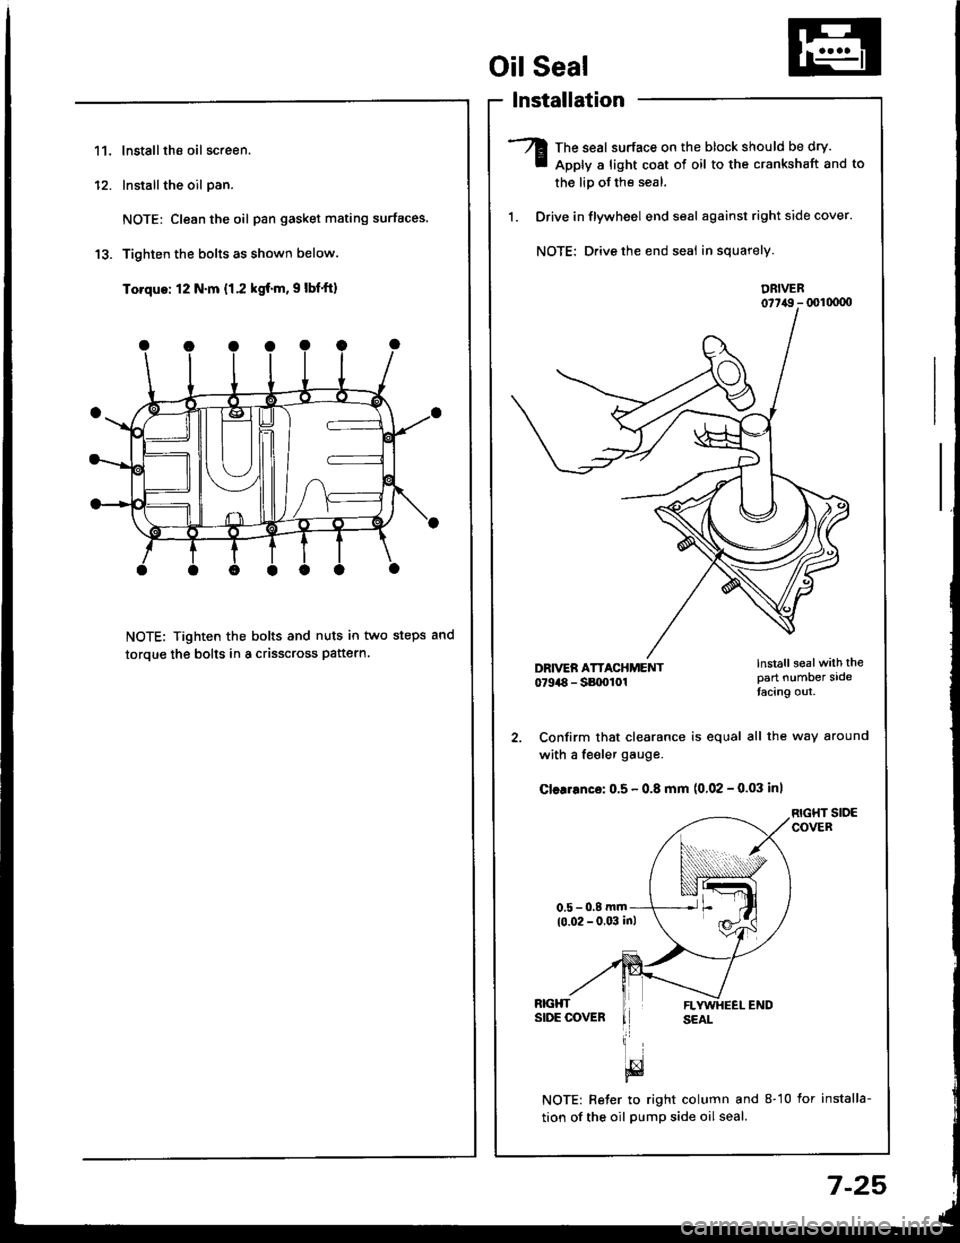 HONDA INTEGRA 1994 4.G Workshop Manual 11.lnstallthe oil screen.
Installthe oil pan.
NOTE: Clean the oil pan gasket mating surfaces.
Tighten the bolts as shown below.
Torque: 12 N.m {1.2 kgf.m, 9 lbfft)
NOTE: Tighten the bolts and nuts in